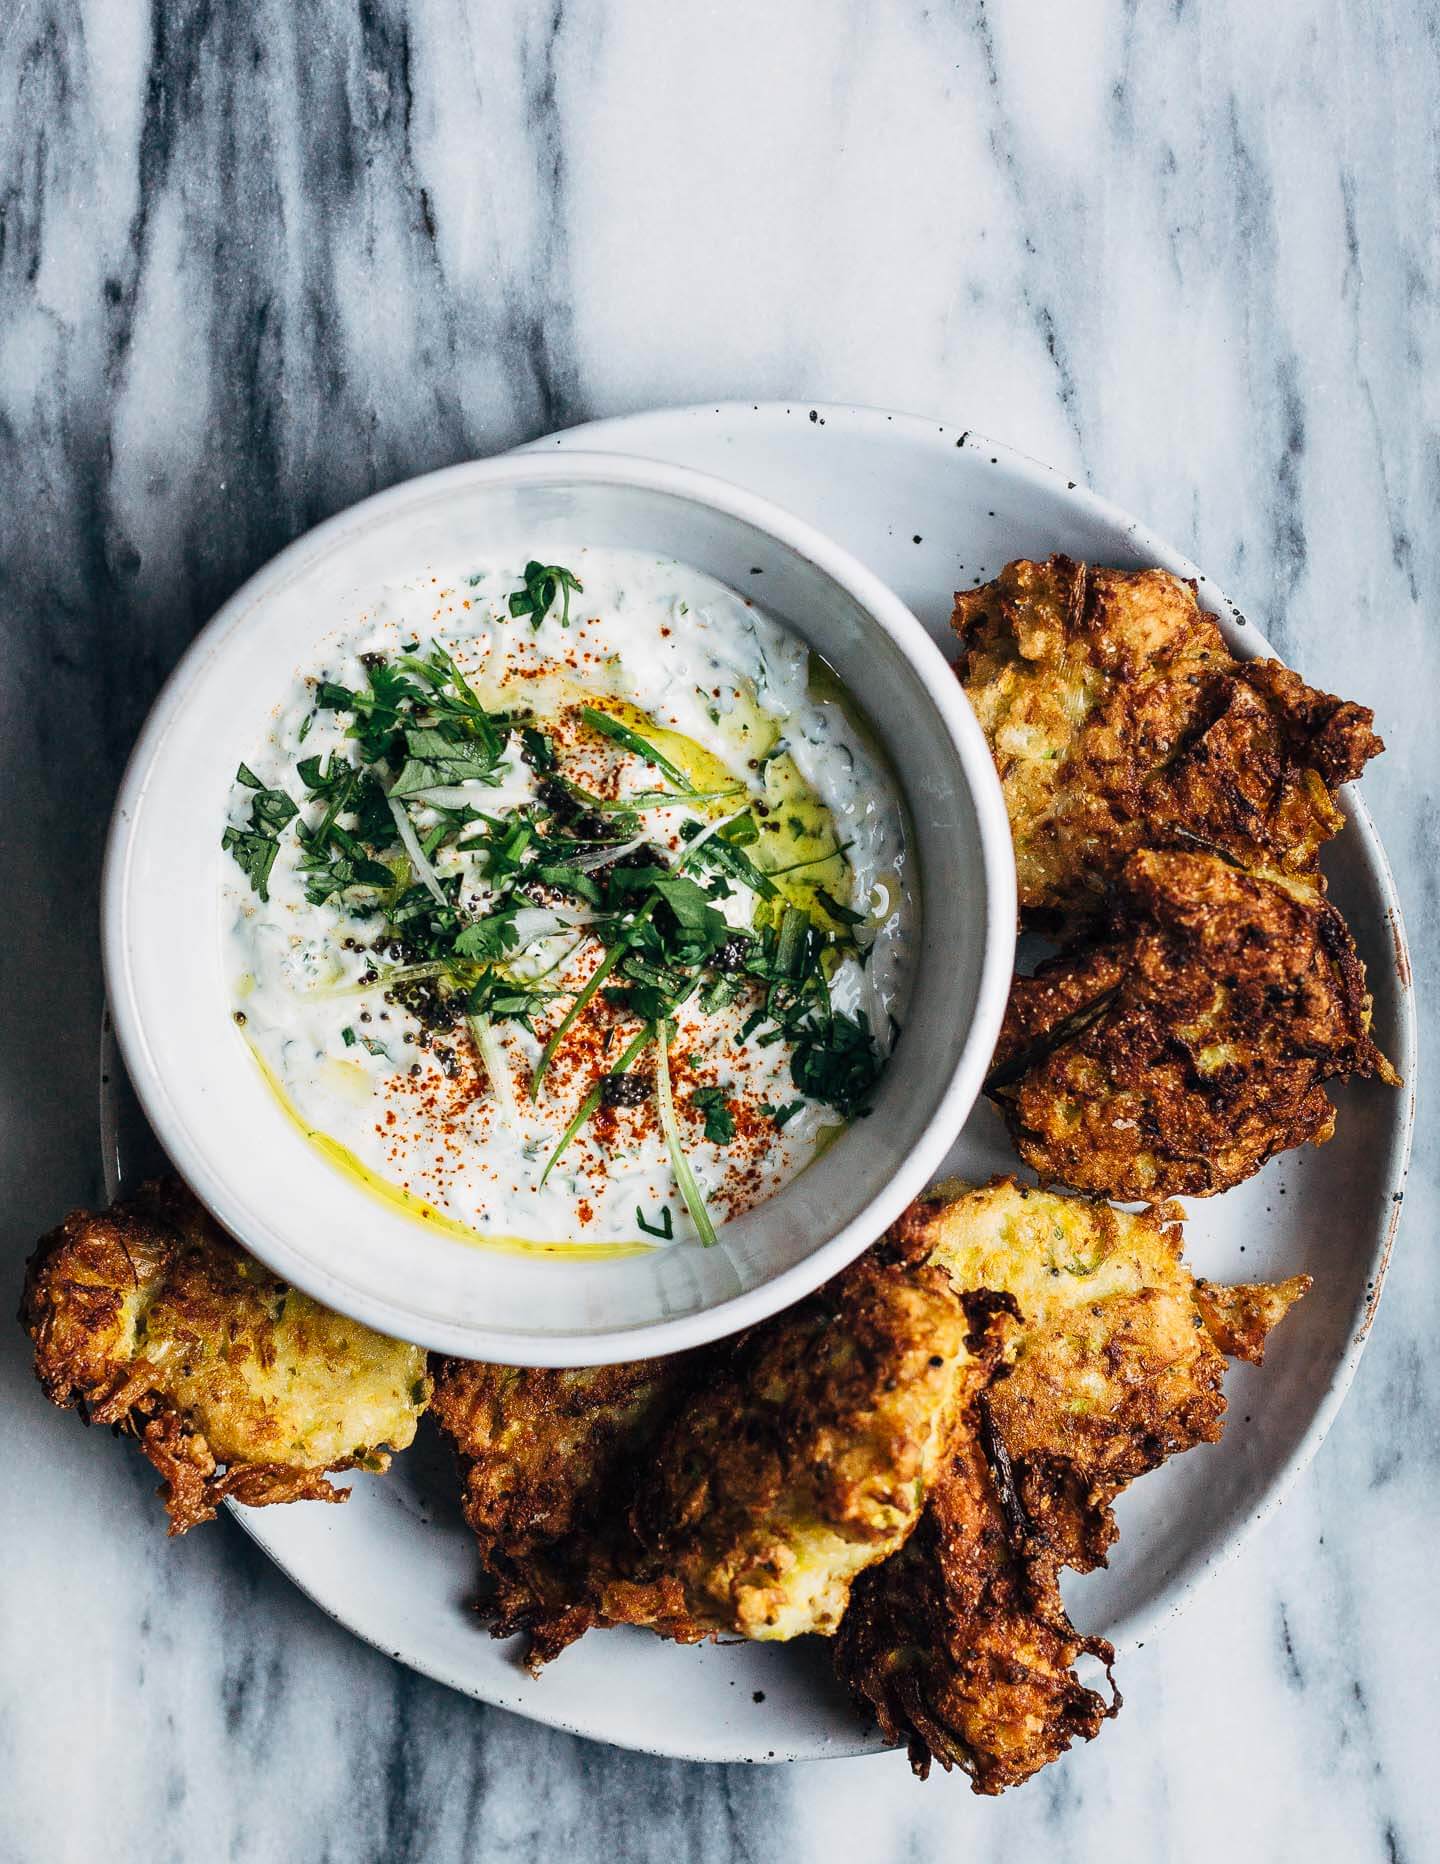 A platter of fried summer squash fritters with a green onion raita dipping sauce